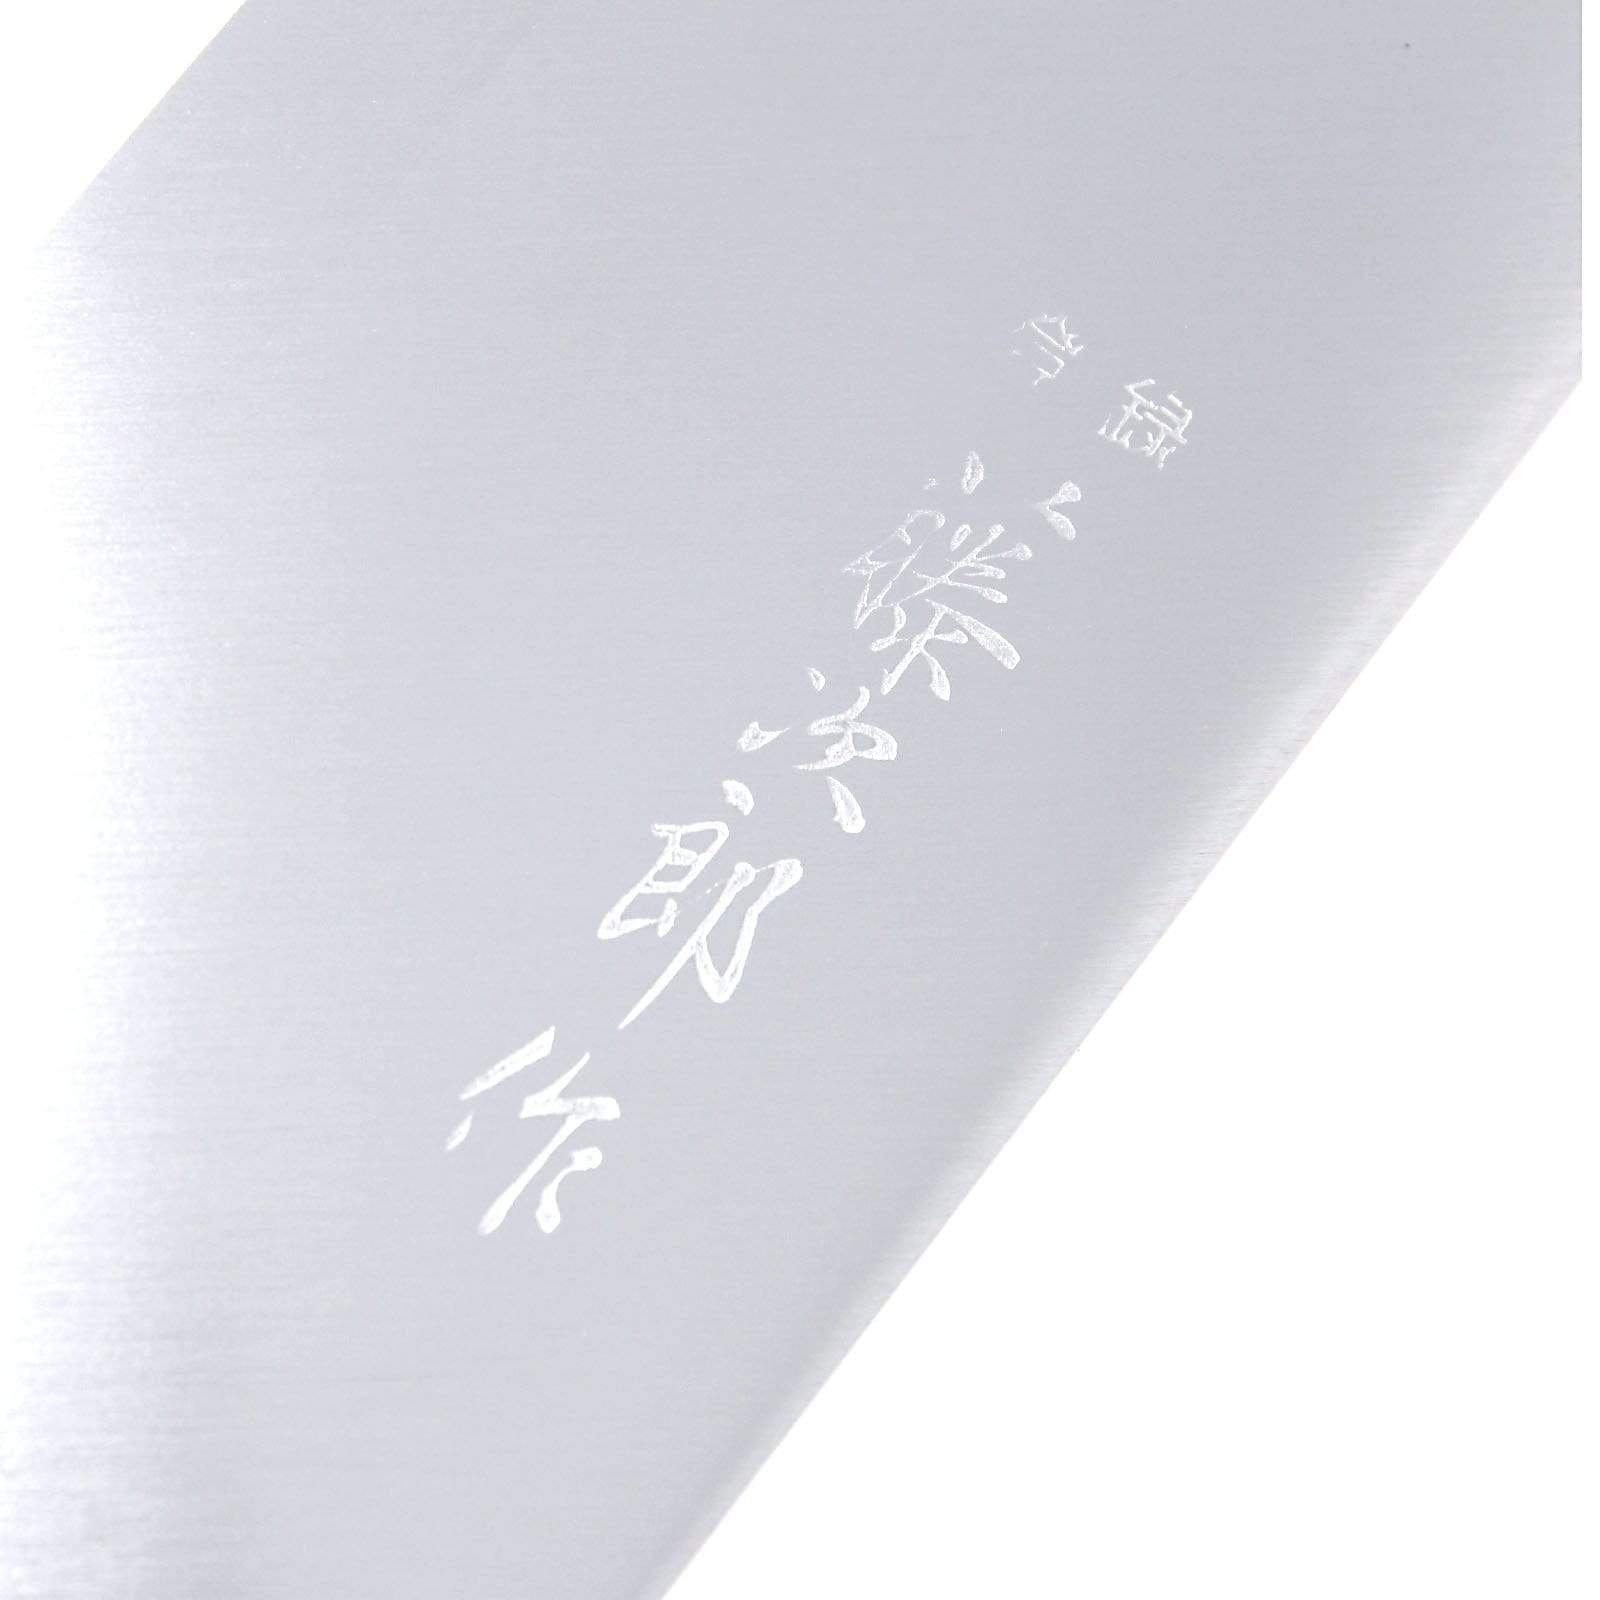 TOJIRO PRO DP 3-Layer Chinese Cleaver with Stainless Steel Handle -  Globalkitchen Japan